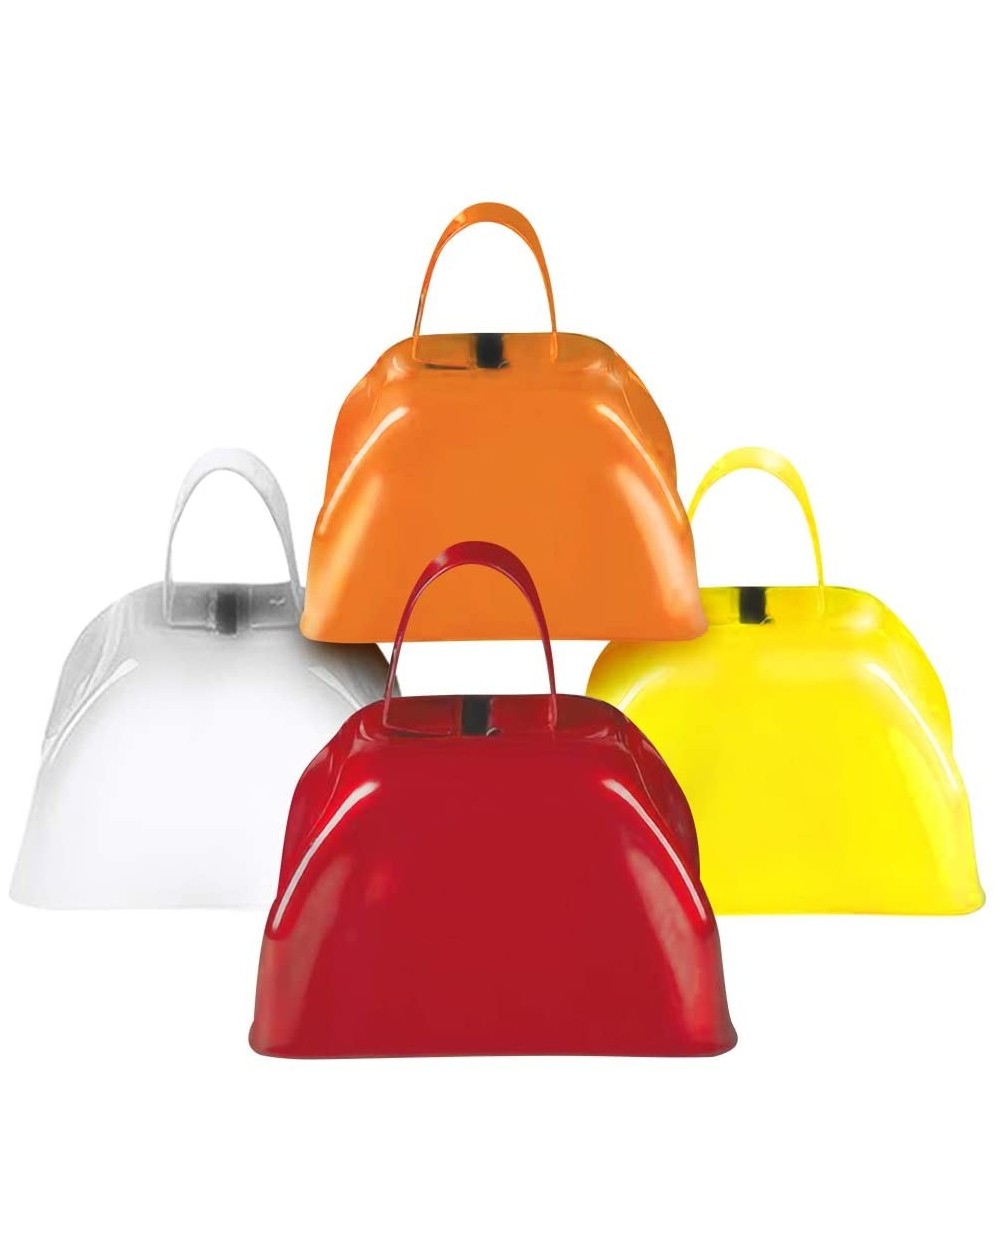 Noisemakers 3 Inch Metal Cowbells Set - Pack of 4 - Loud Metal Cowbell Noisemakers with Handles - Red- Orange- Yellow and Whi...